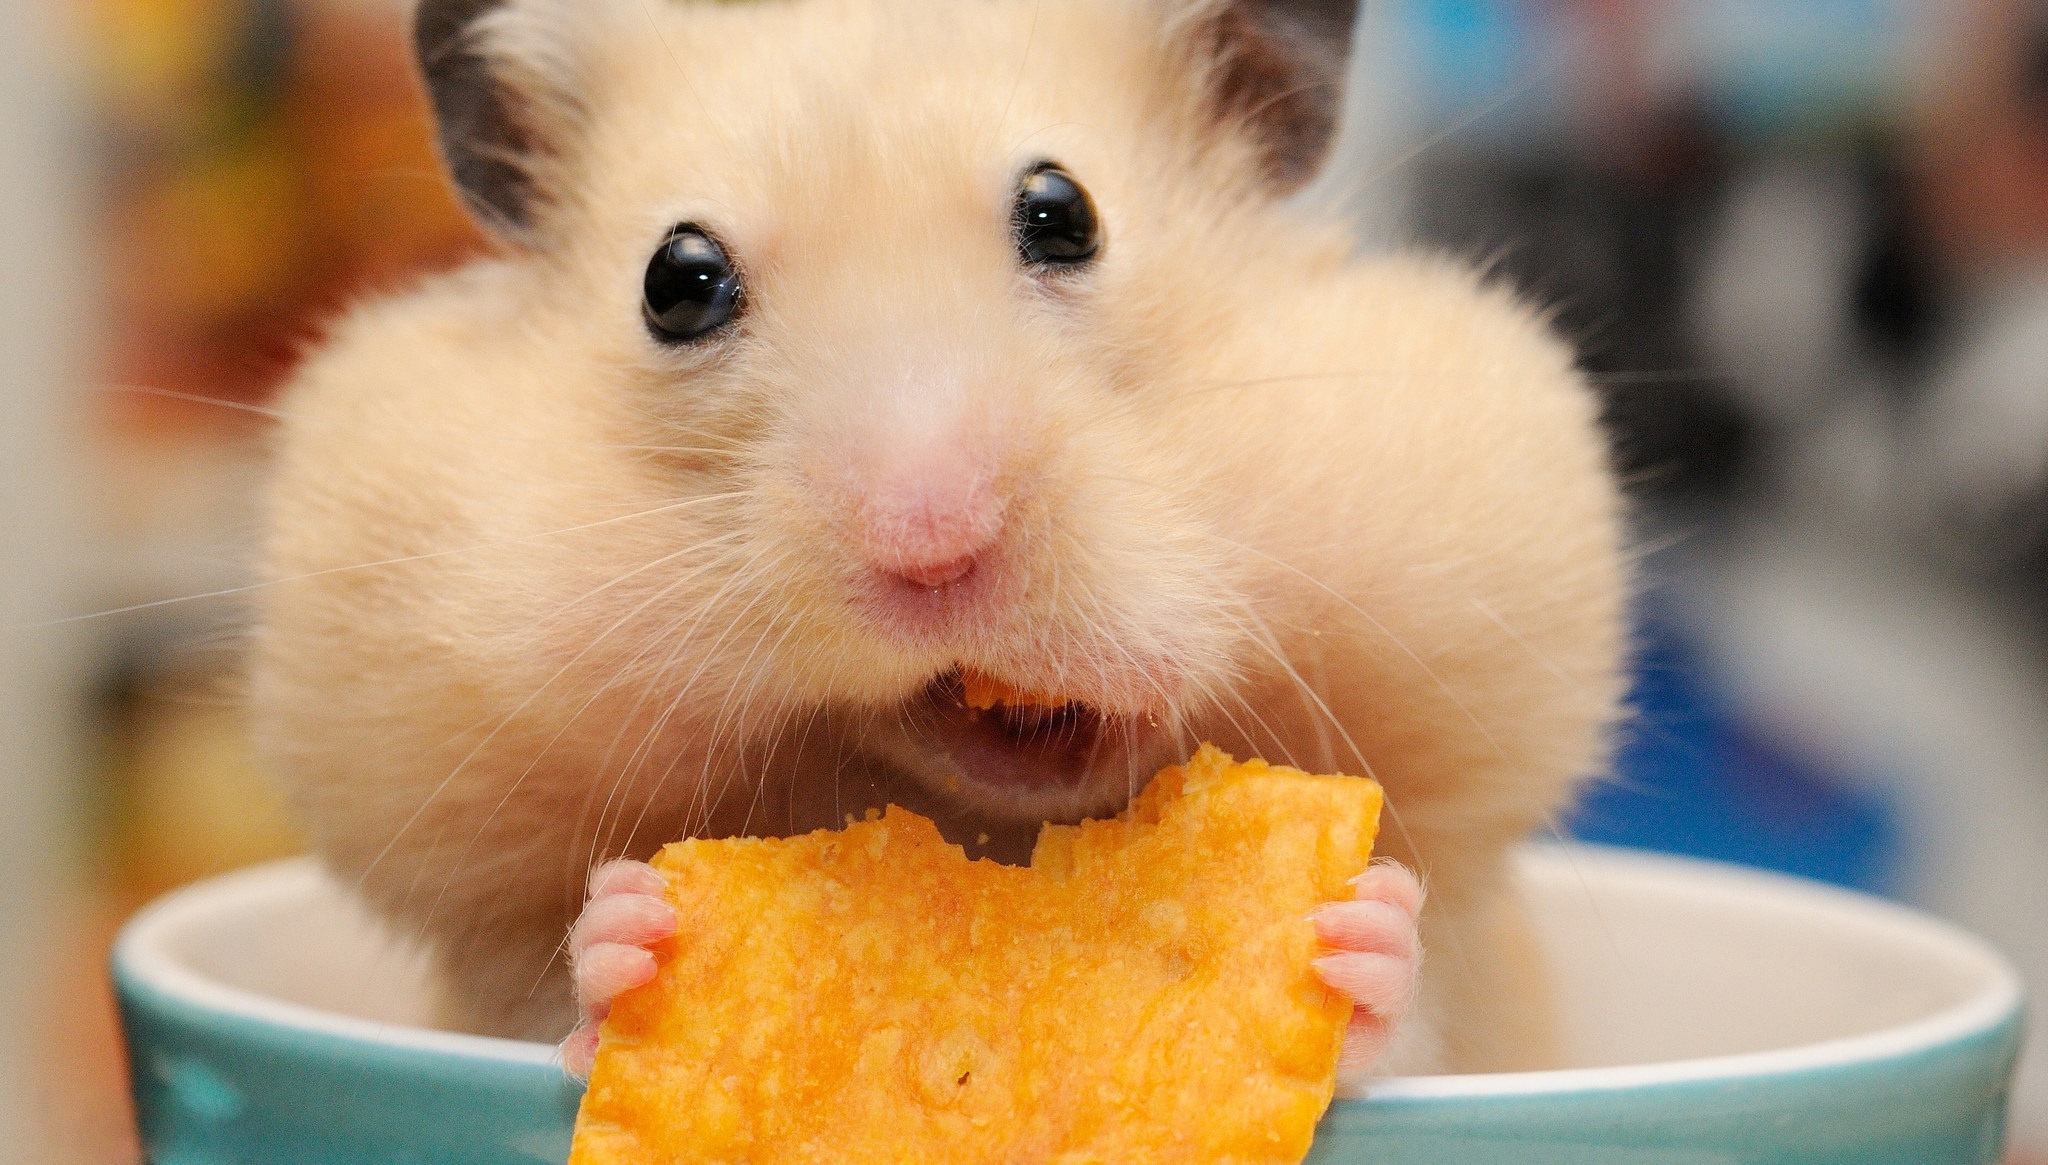 HD hamster wallpapers, Adorable and furry, Curious little creatures, Cute hamster moments, 2050x1170 HD Desktop